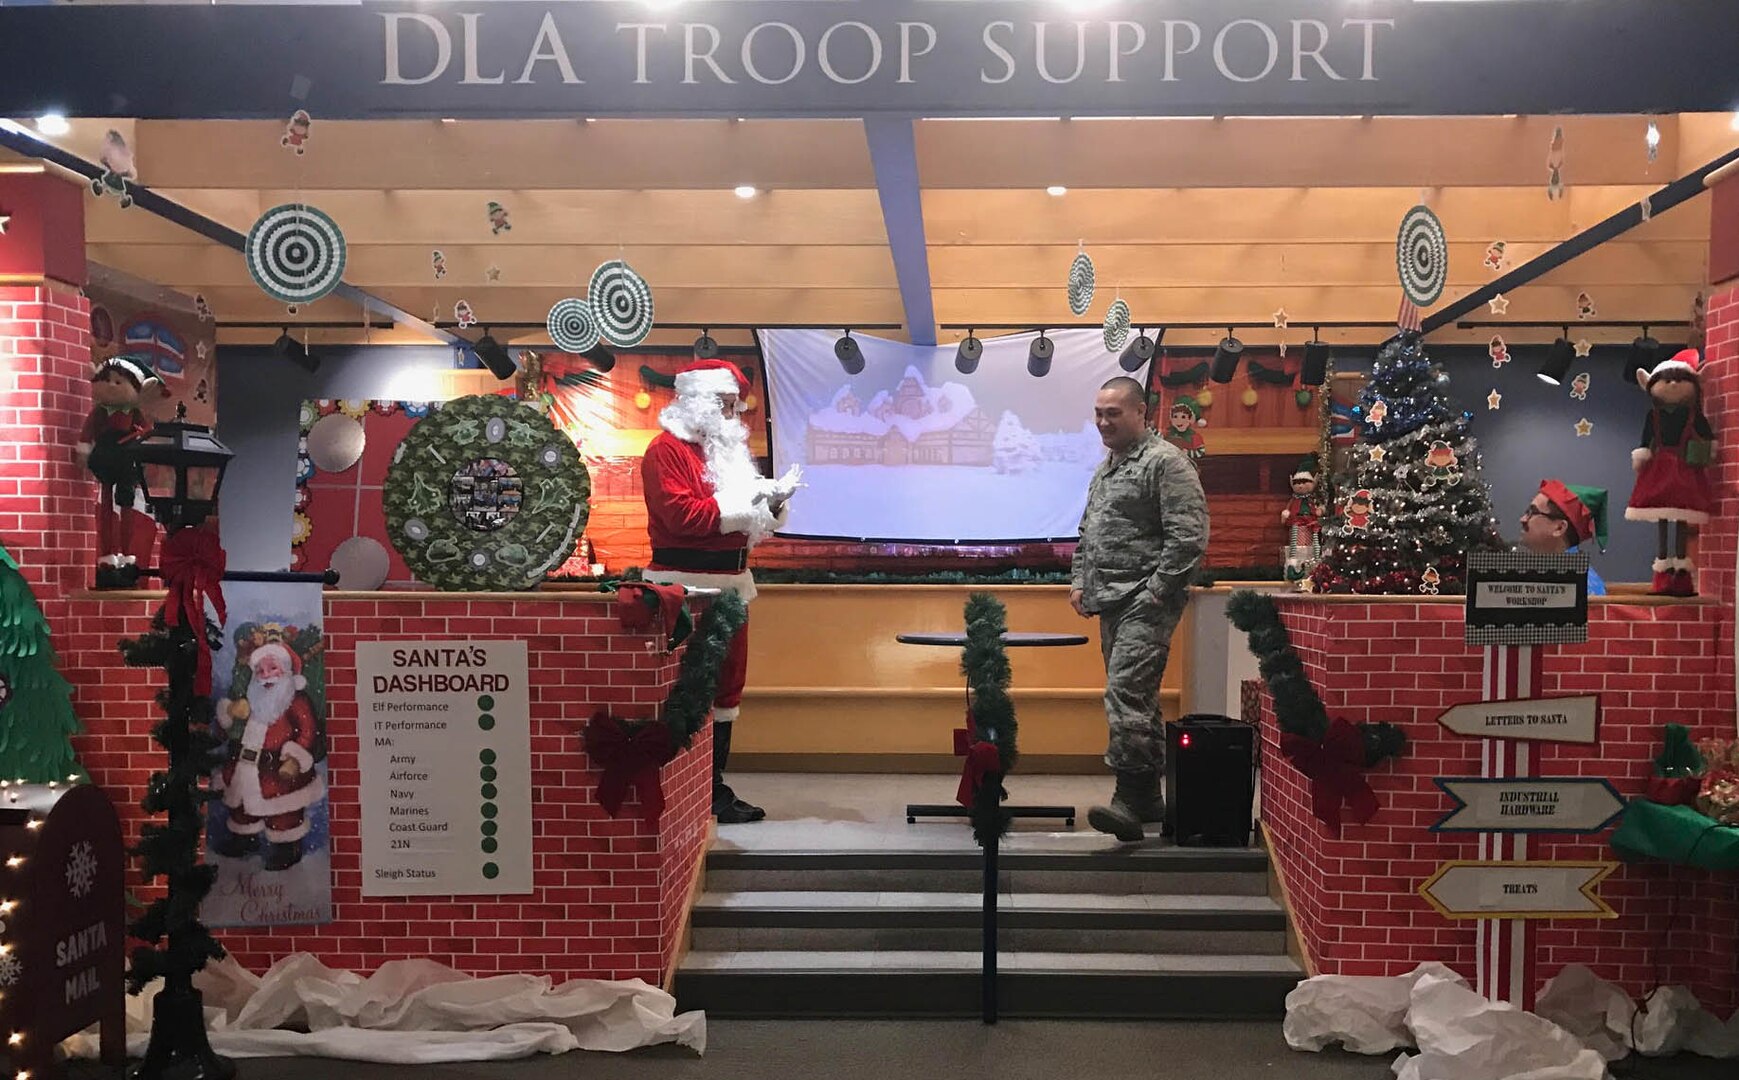 Defense Logistics Agency Troop Support Industrial Hardware Director Air Force Col. Adrian Crowley is addressed by Santa, played by contract specialist Craig Singleton, in a presentation from IH as part of their entry in the 2018 holiday decorating contest in Philadelphia Dec. 20, 2018.